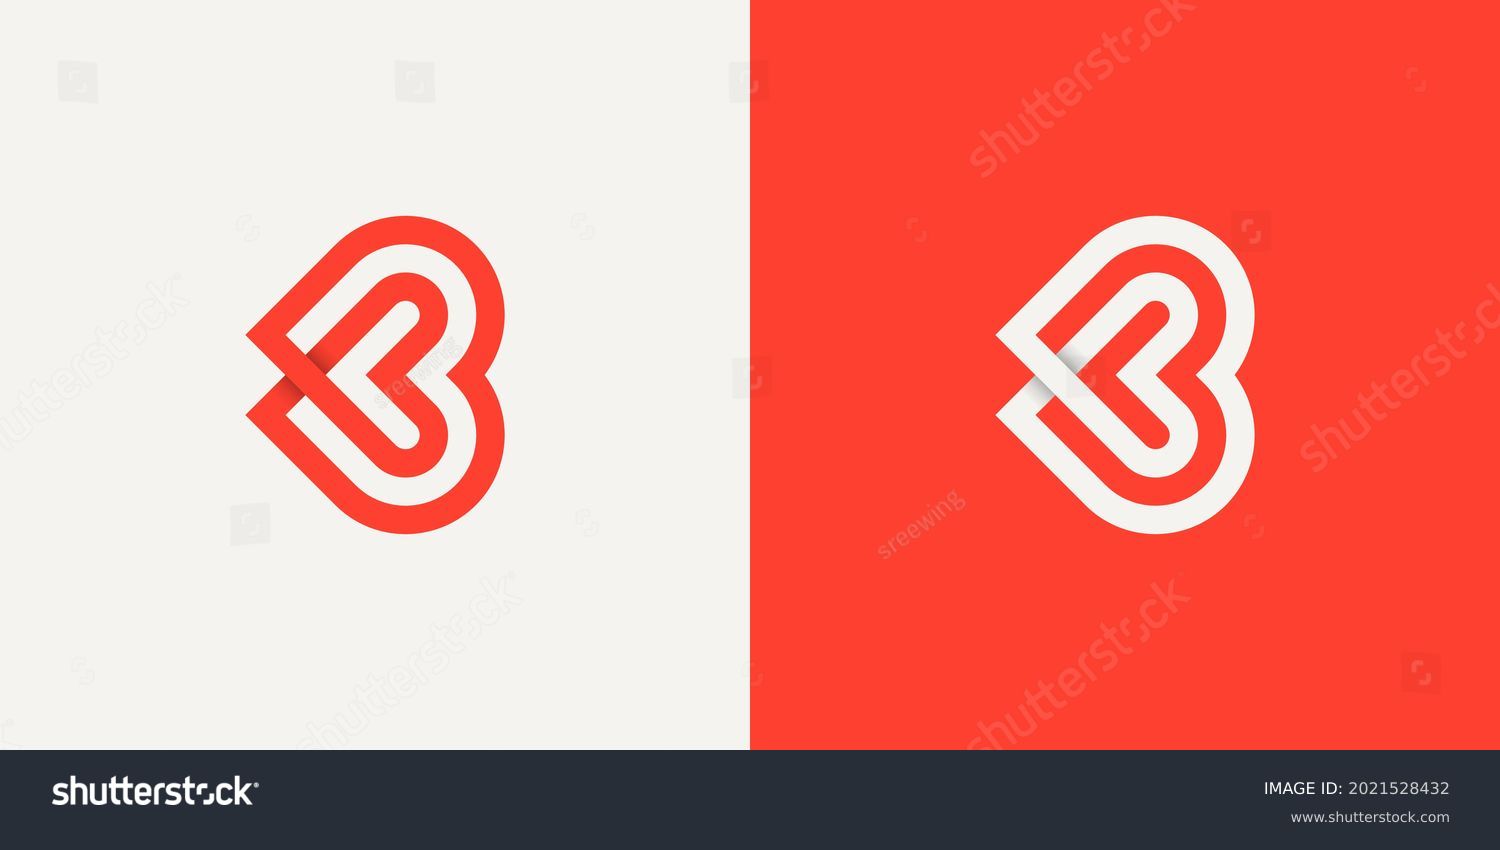 SVG of Initial Letter K and B Linked Logo. Red and White Infinity Line Origami Style isolated on Double Background. Usable for Business and Branding Logos. Flat Vector Logo Design Template Element. svg